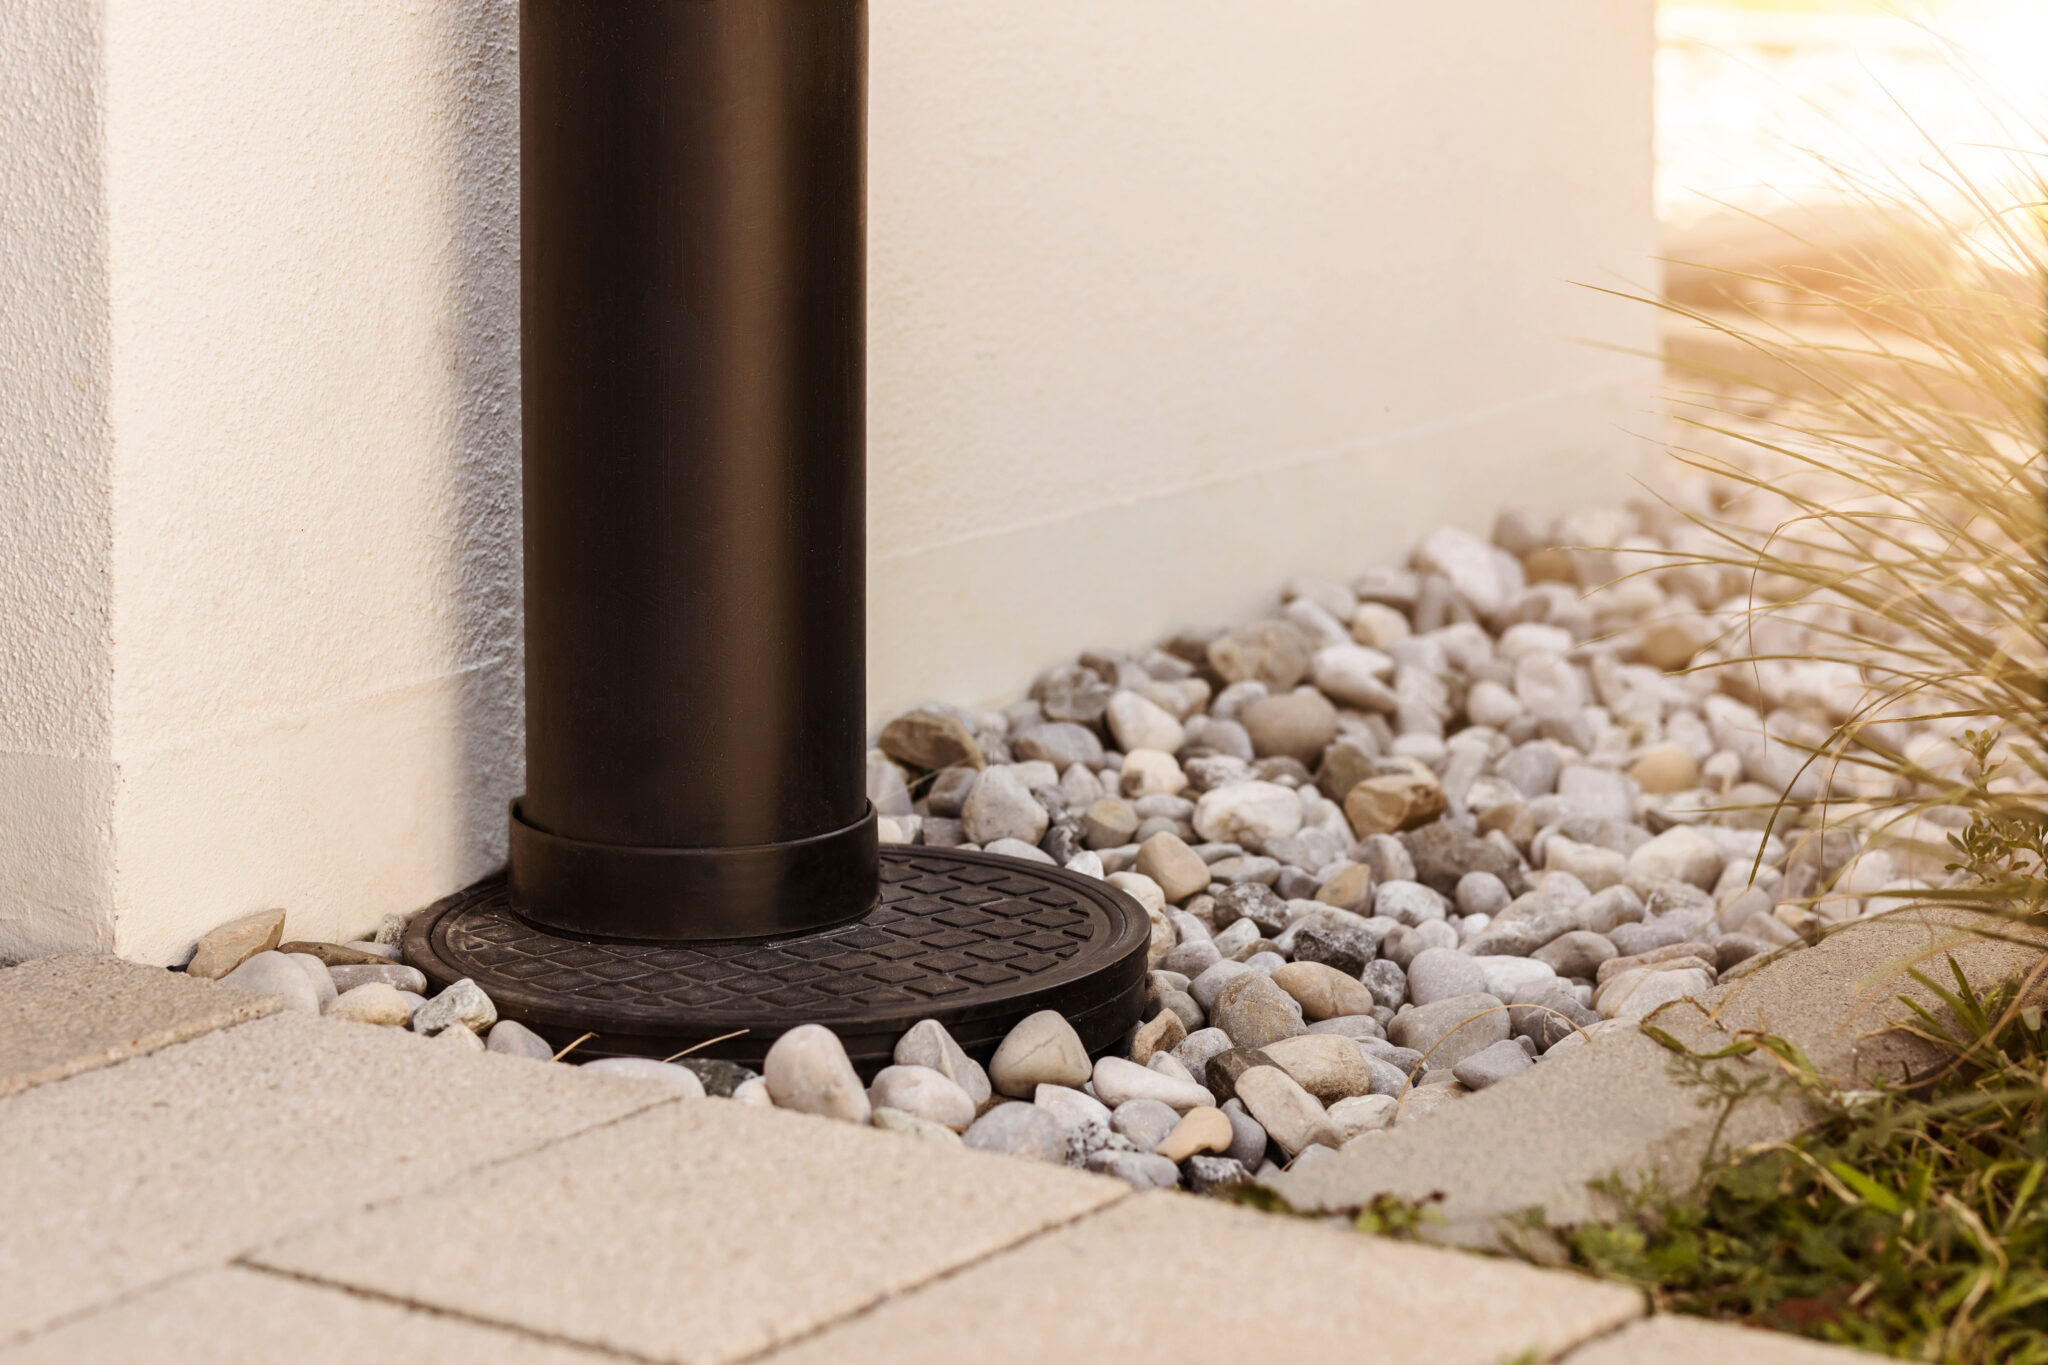 French drain Water Drainage pipe with water Stones Gravel aroud House